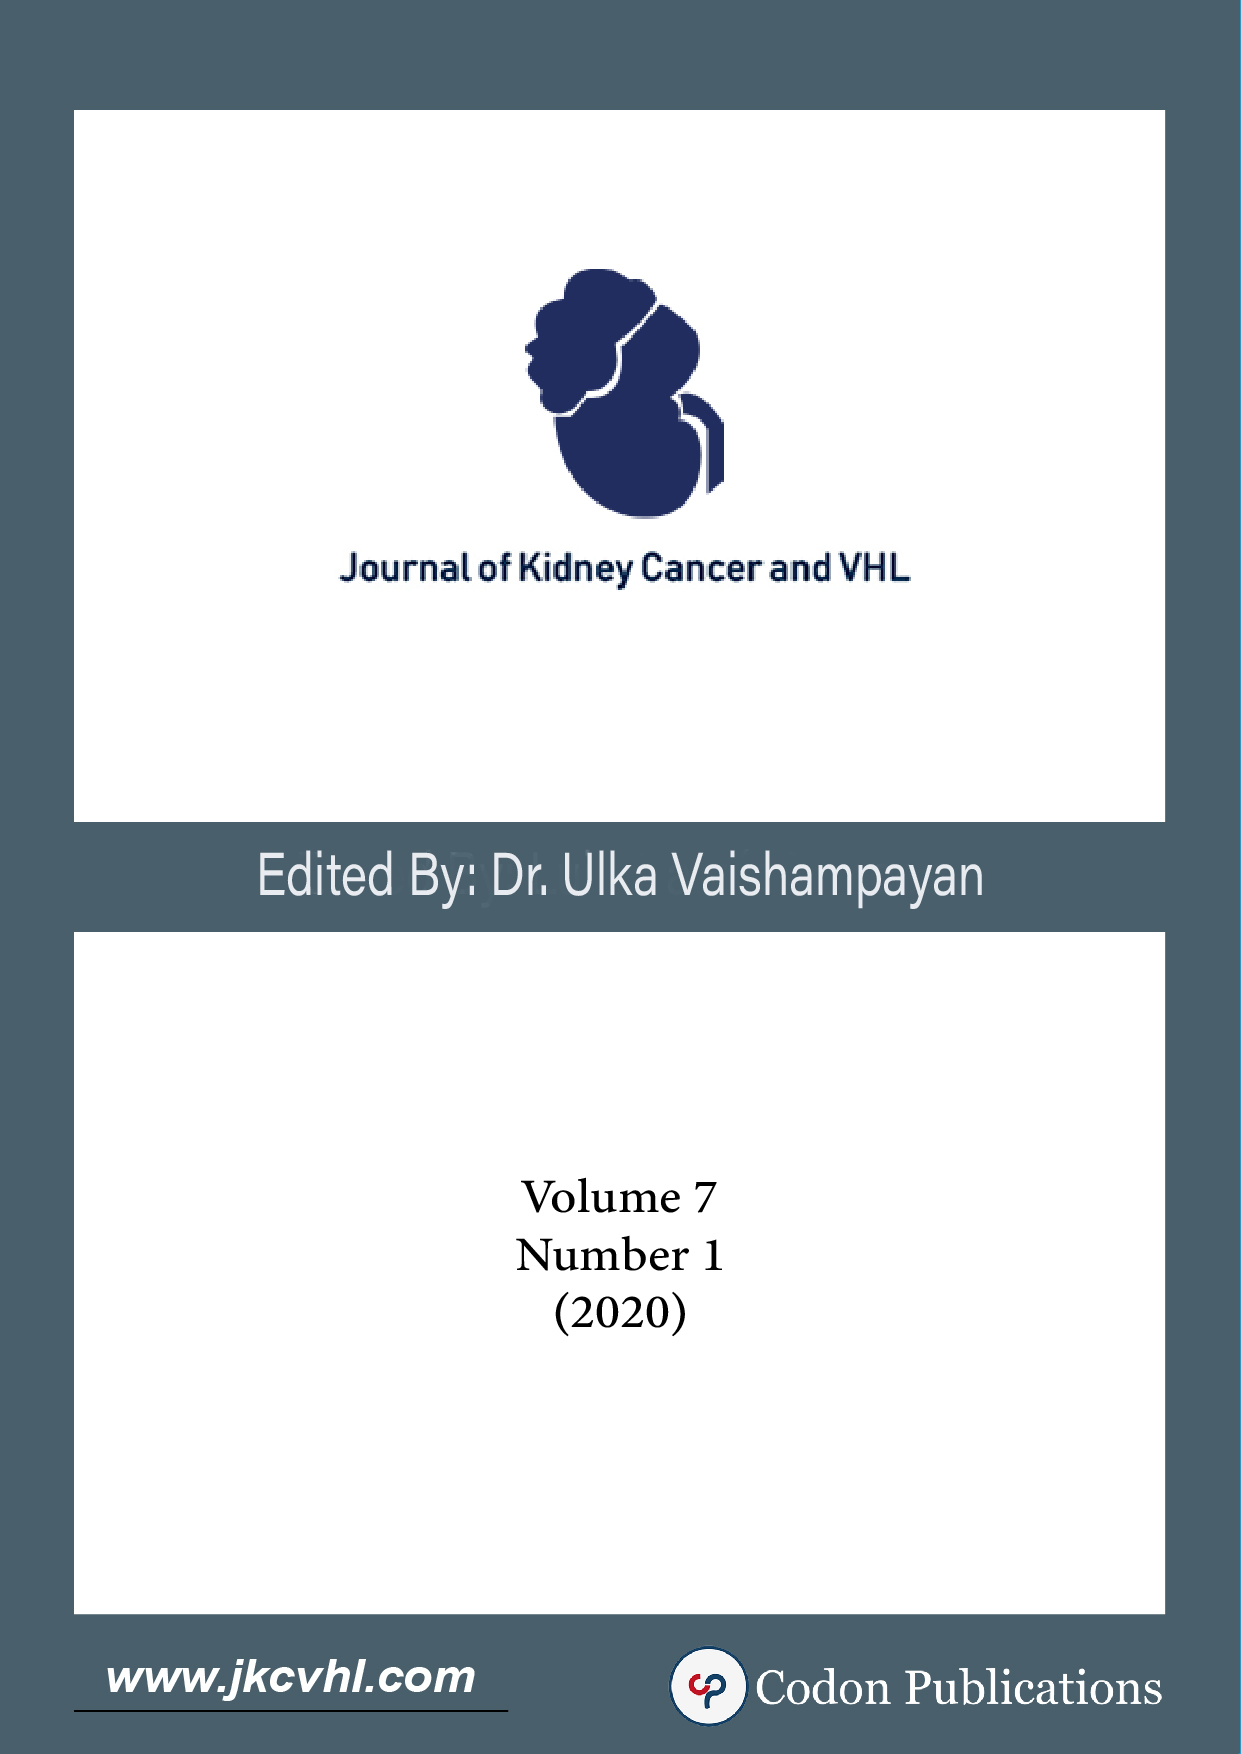 					View Vol. 7 No. 1 (2020): Journal of Kidney Cancer and VHL
				